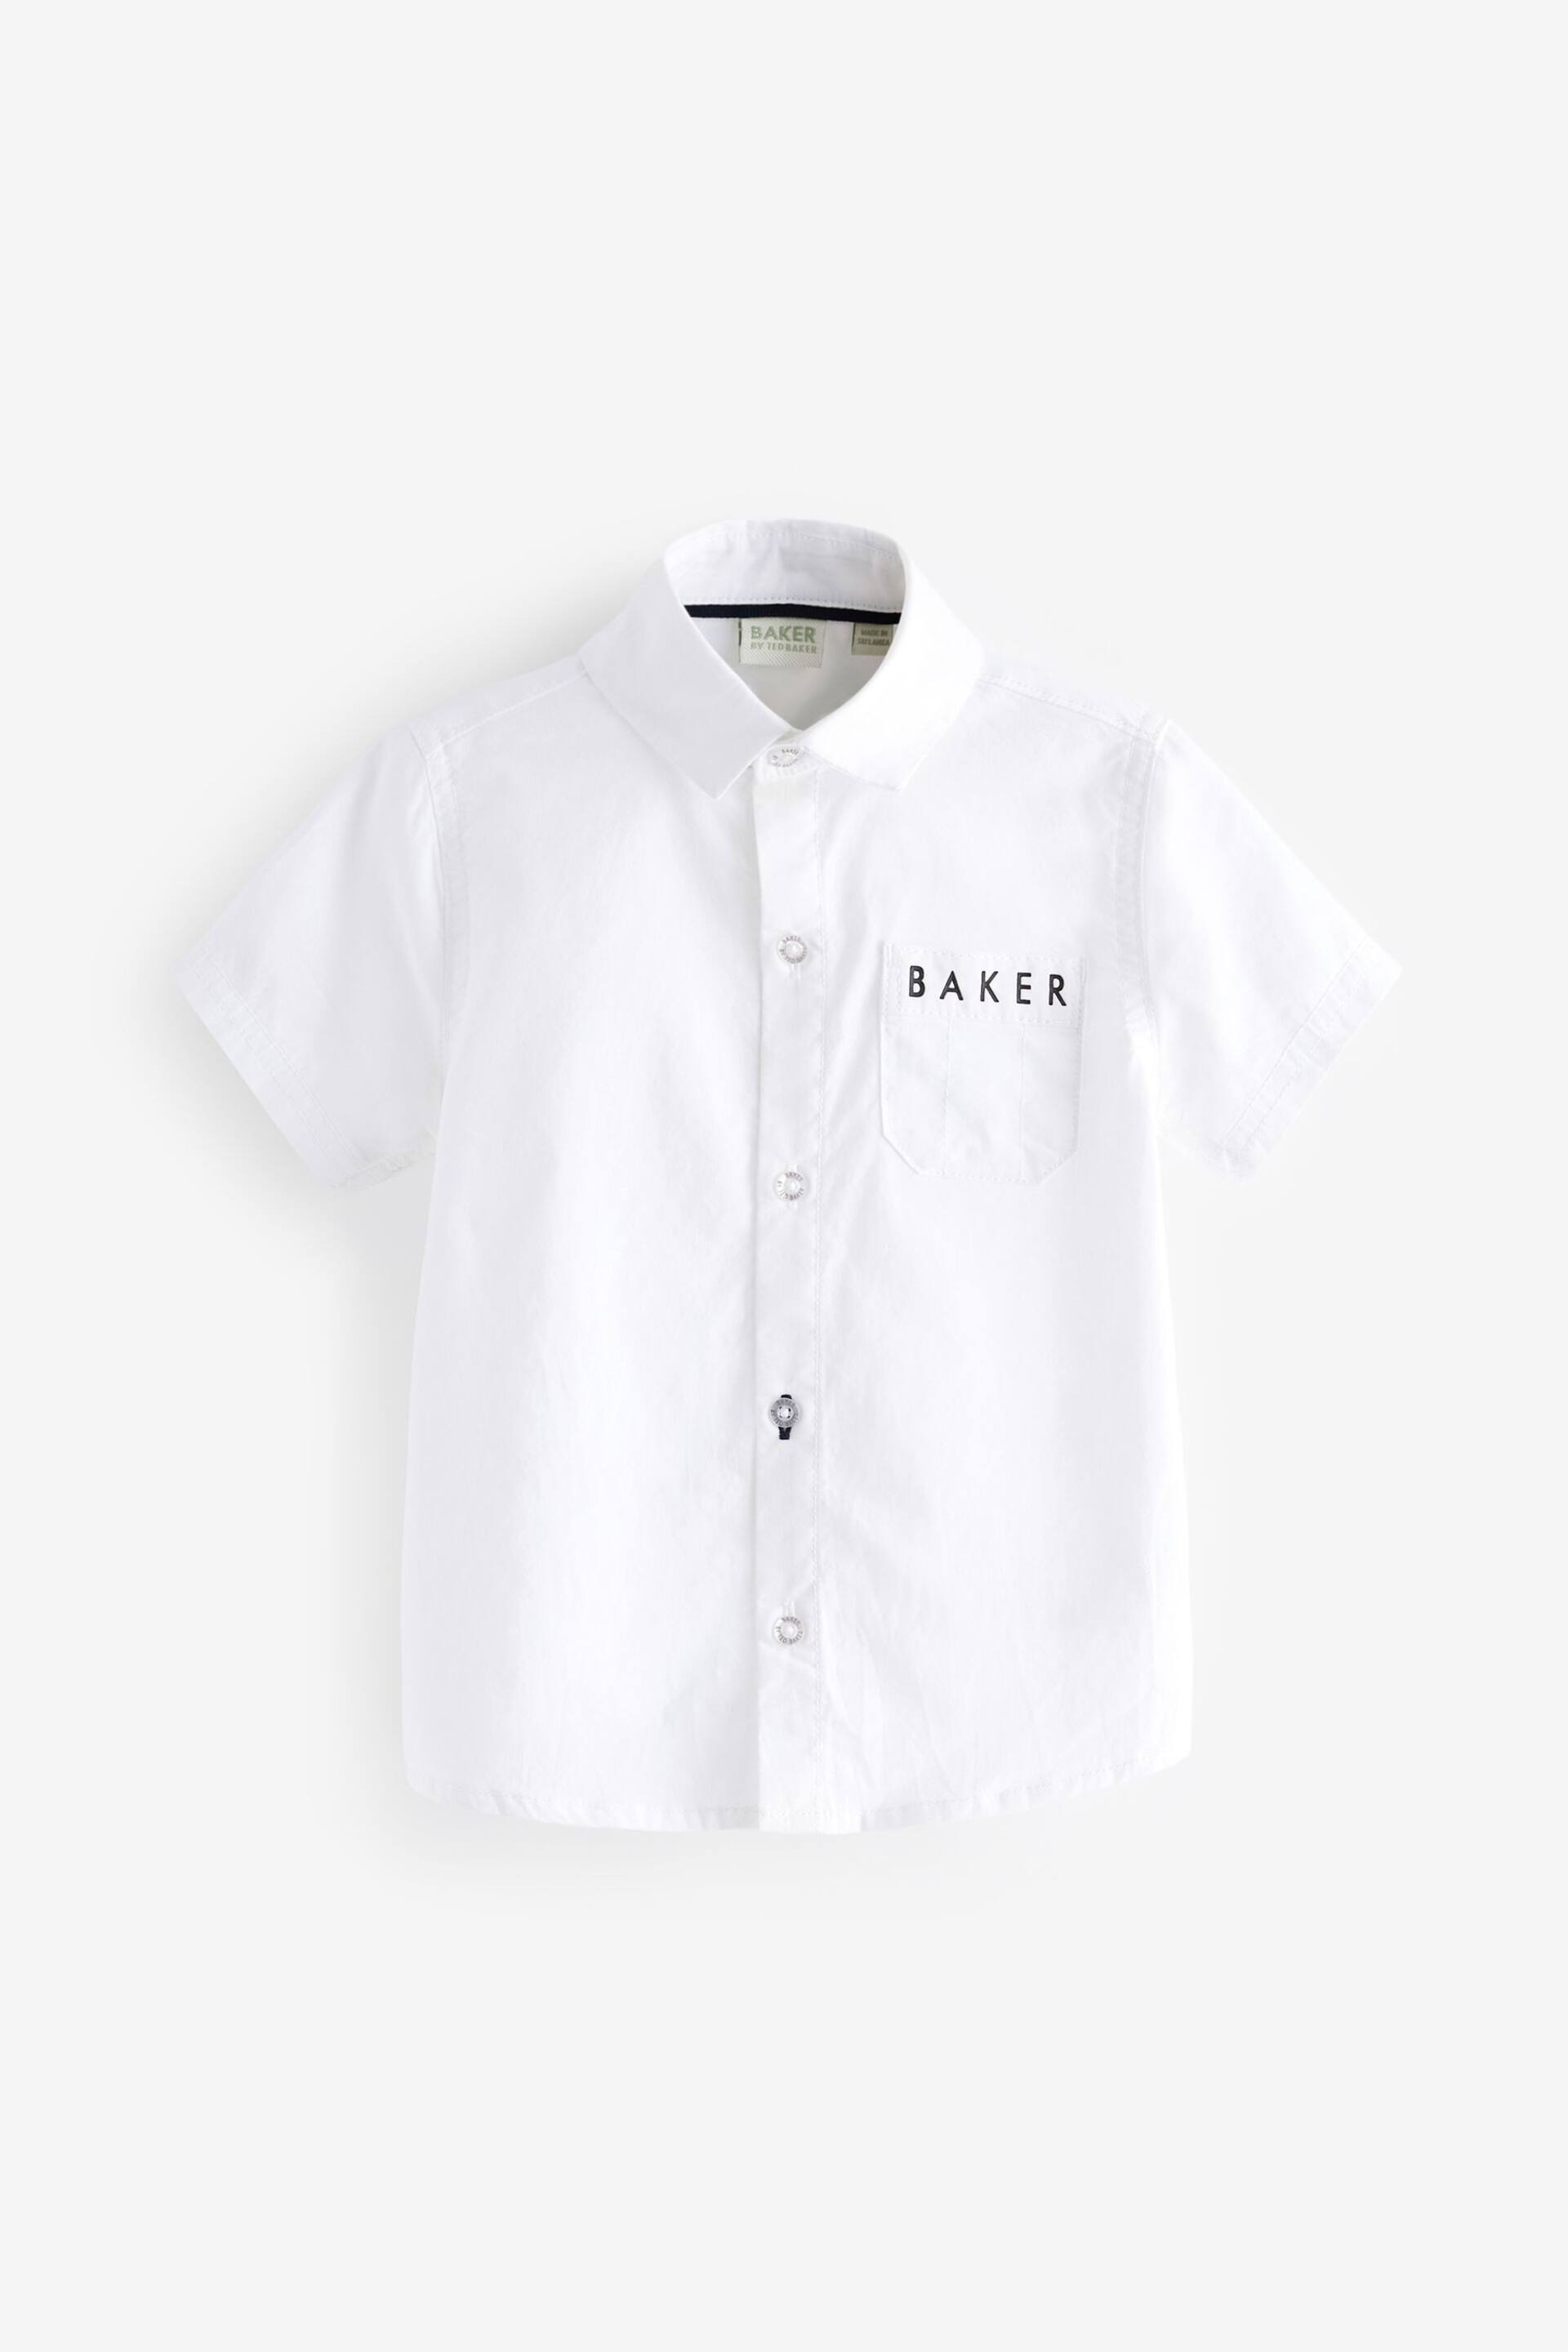 Baker by Ted Baker Shirt and Trousers Set - Image 11 of 13